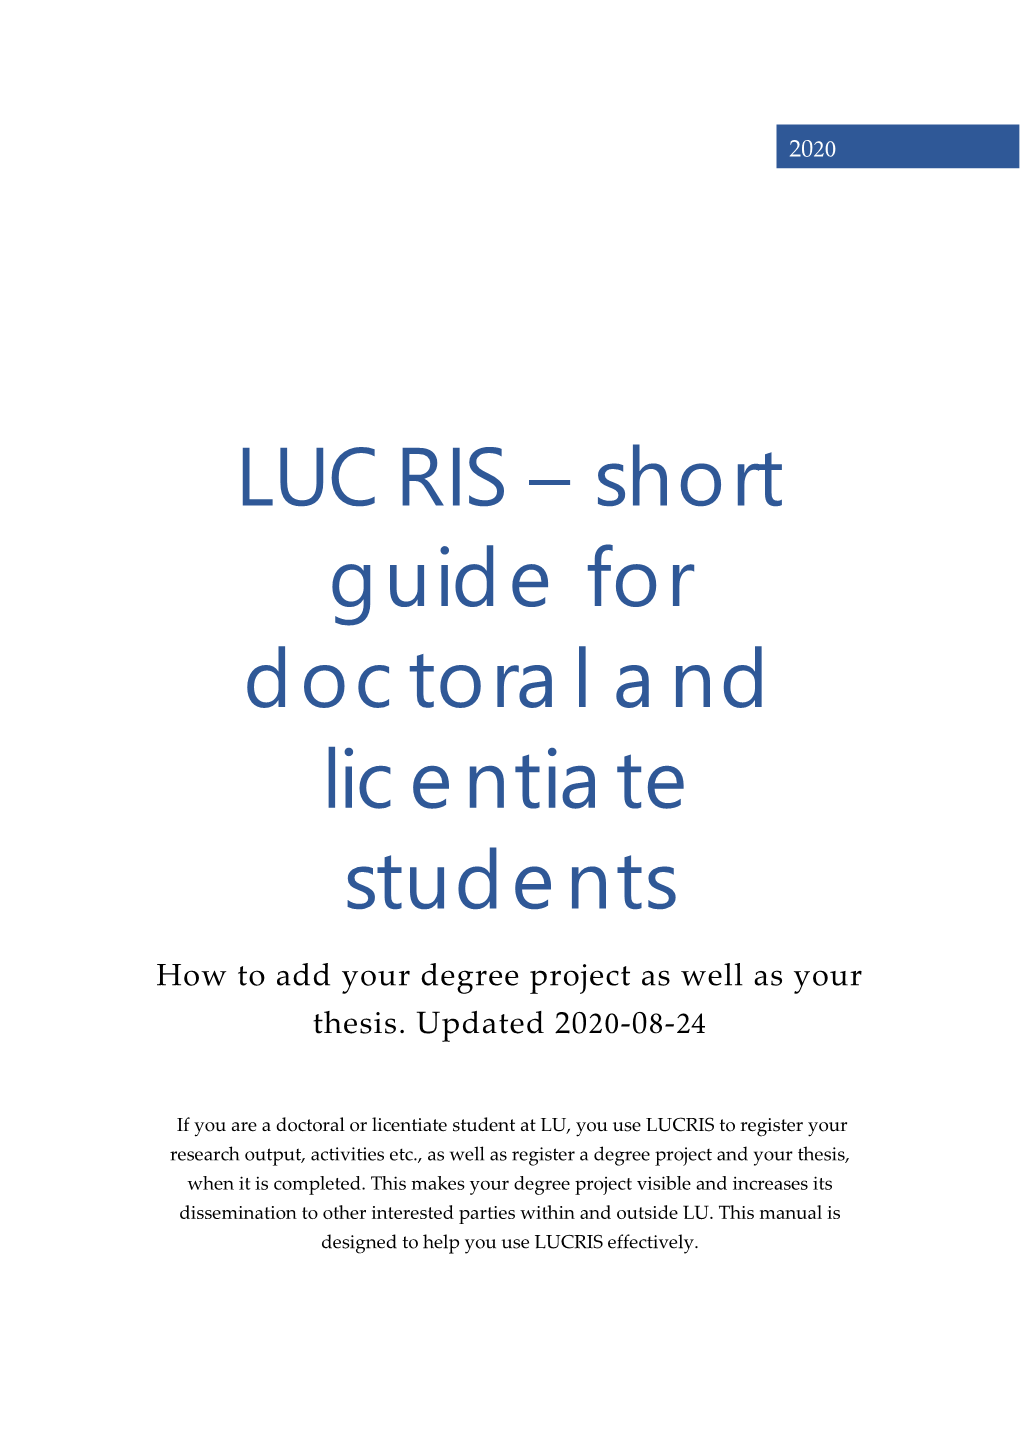 LUCRIS – Short Guide for Doctoral and Licentiate Students How to Add Your Degree Project As Well As Your Thesis